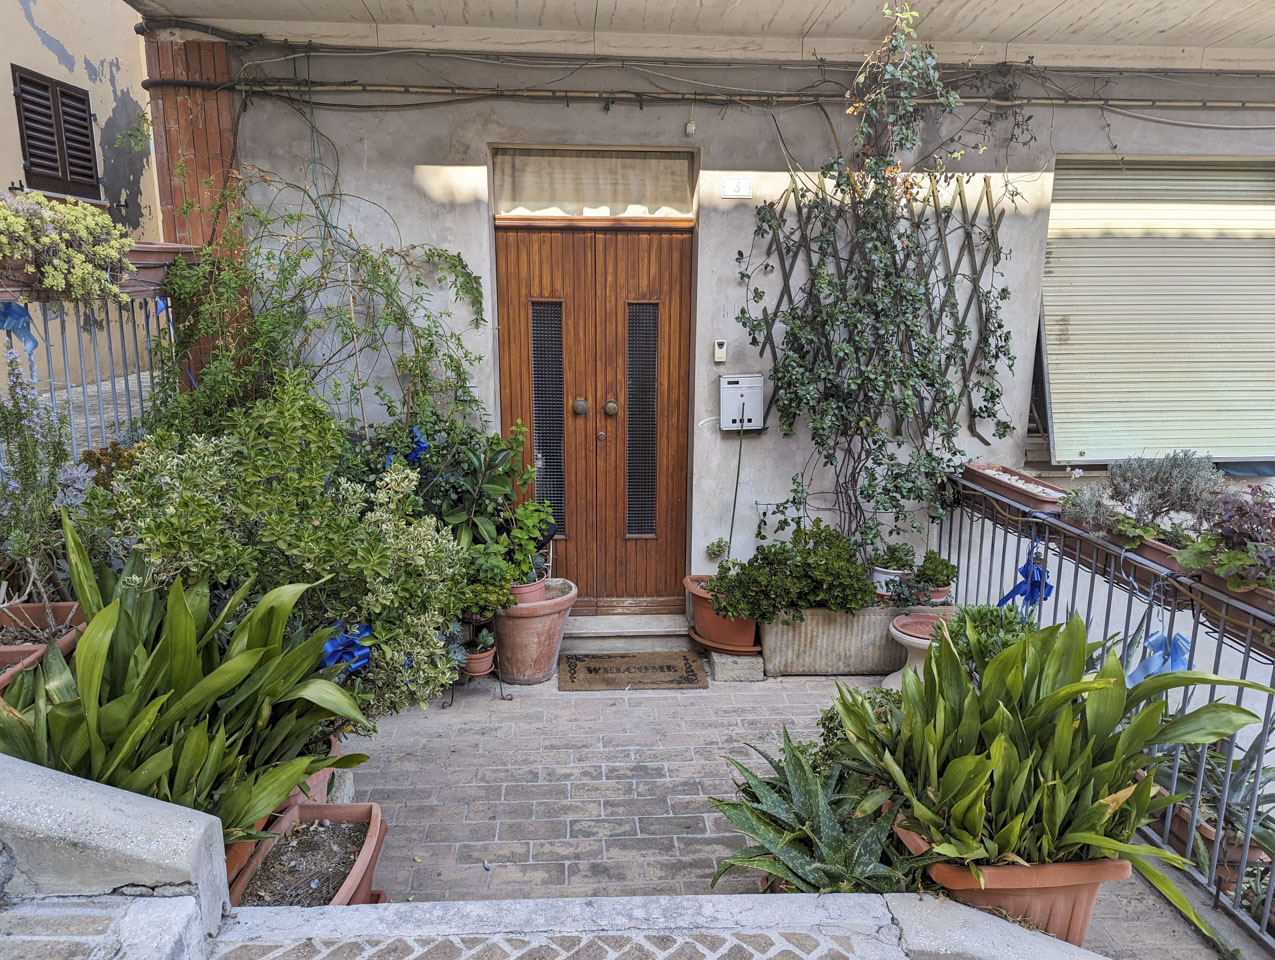 Entrance to a house with many plants